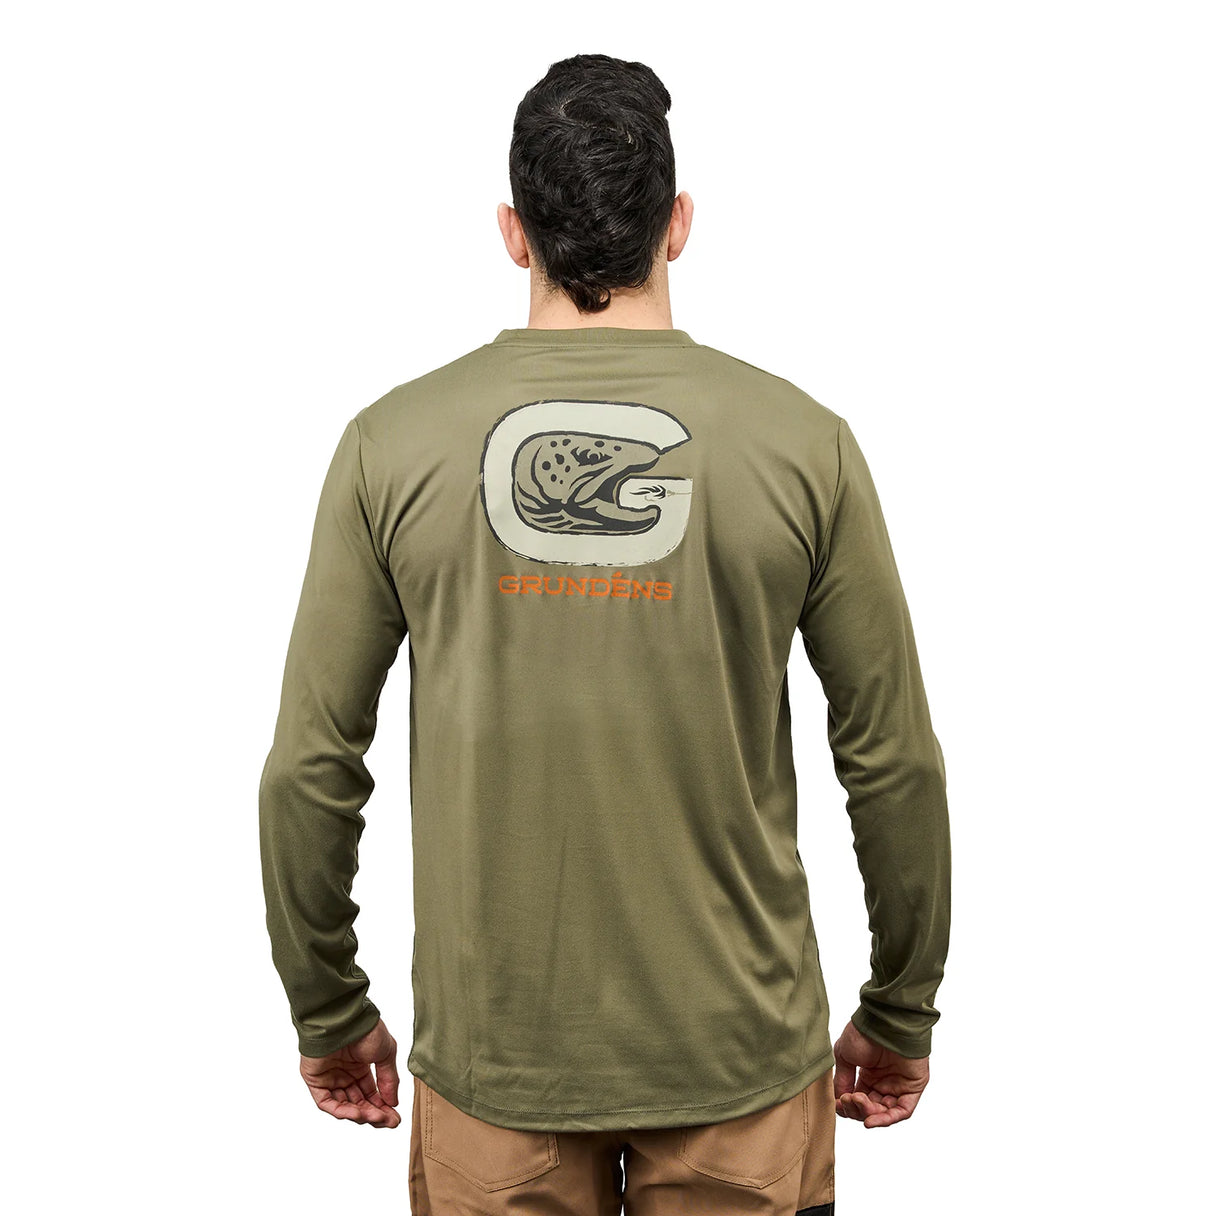 Grundens Men's G Trout Long-Sleeve Tech Tee - Forest M